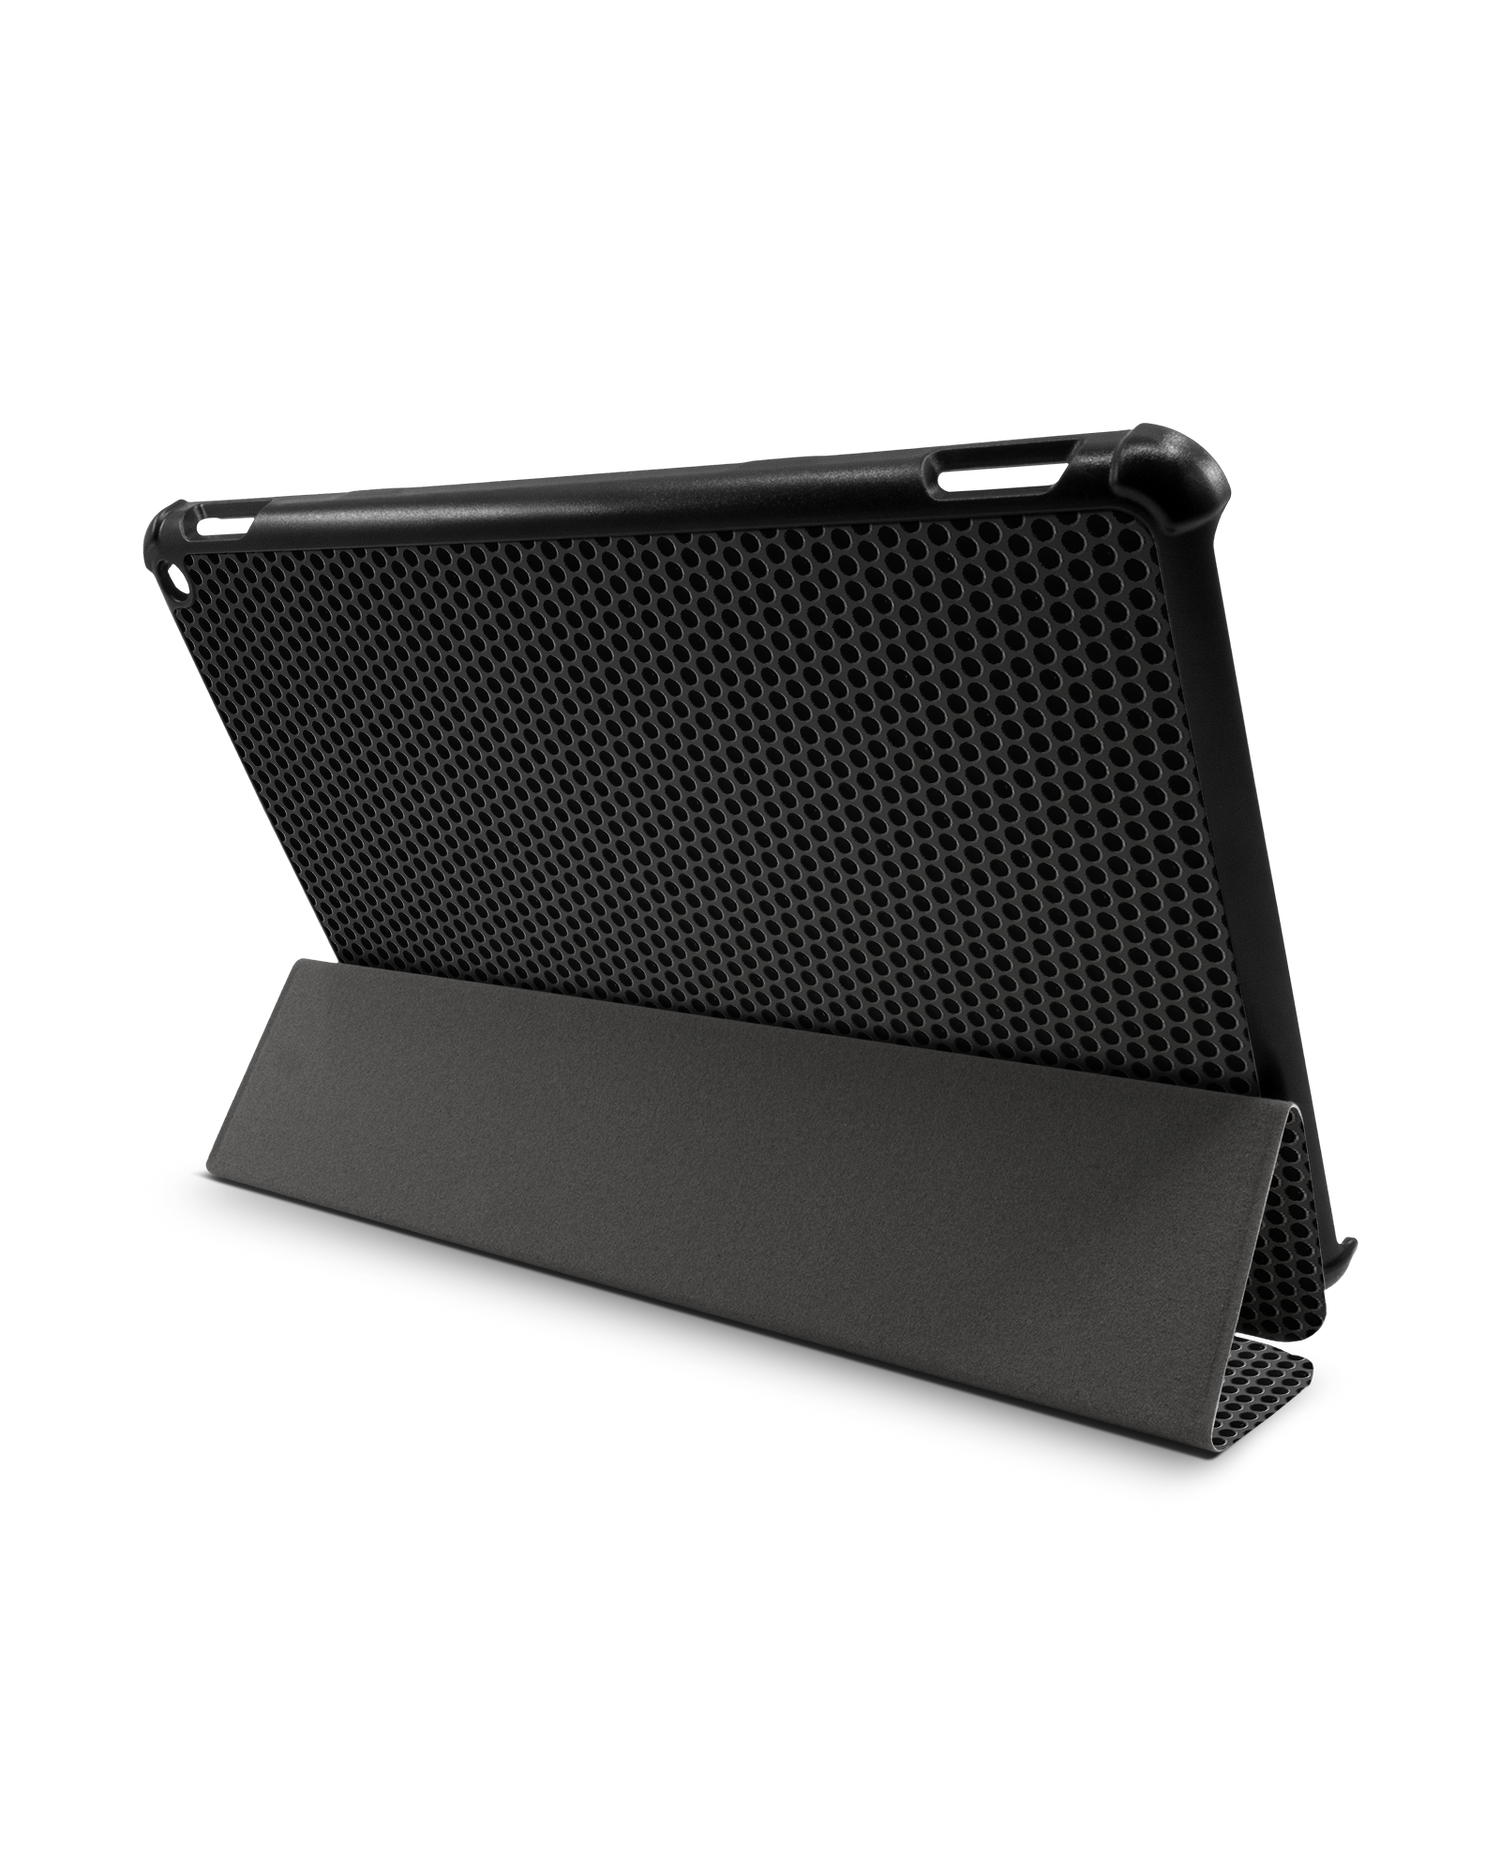 Carbon II Tablet Smart Case for Amazon Fire HD 10 (2021): Used as Stand